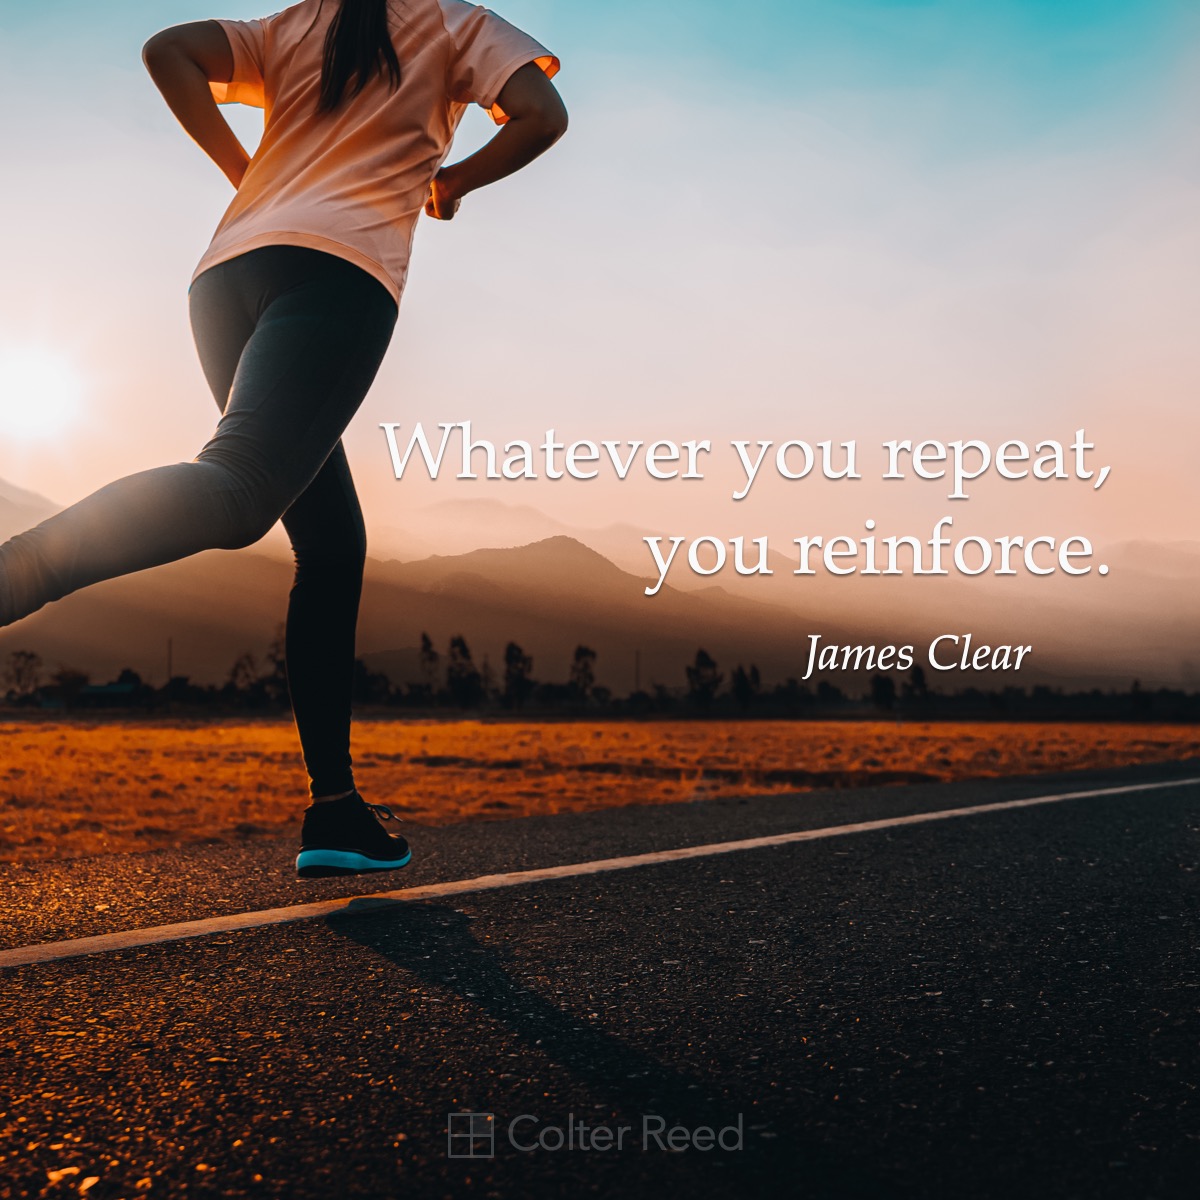 Whatever you repeat, you reinforce. —James Clear